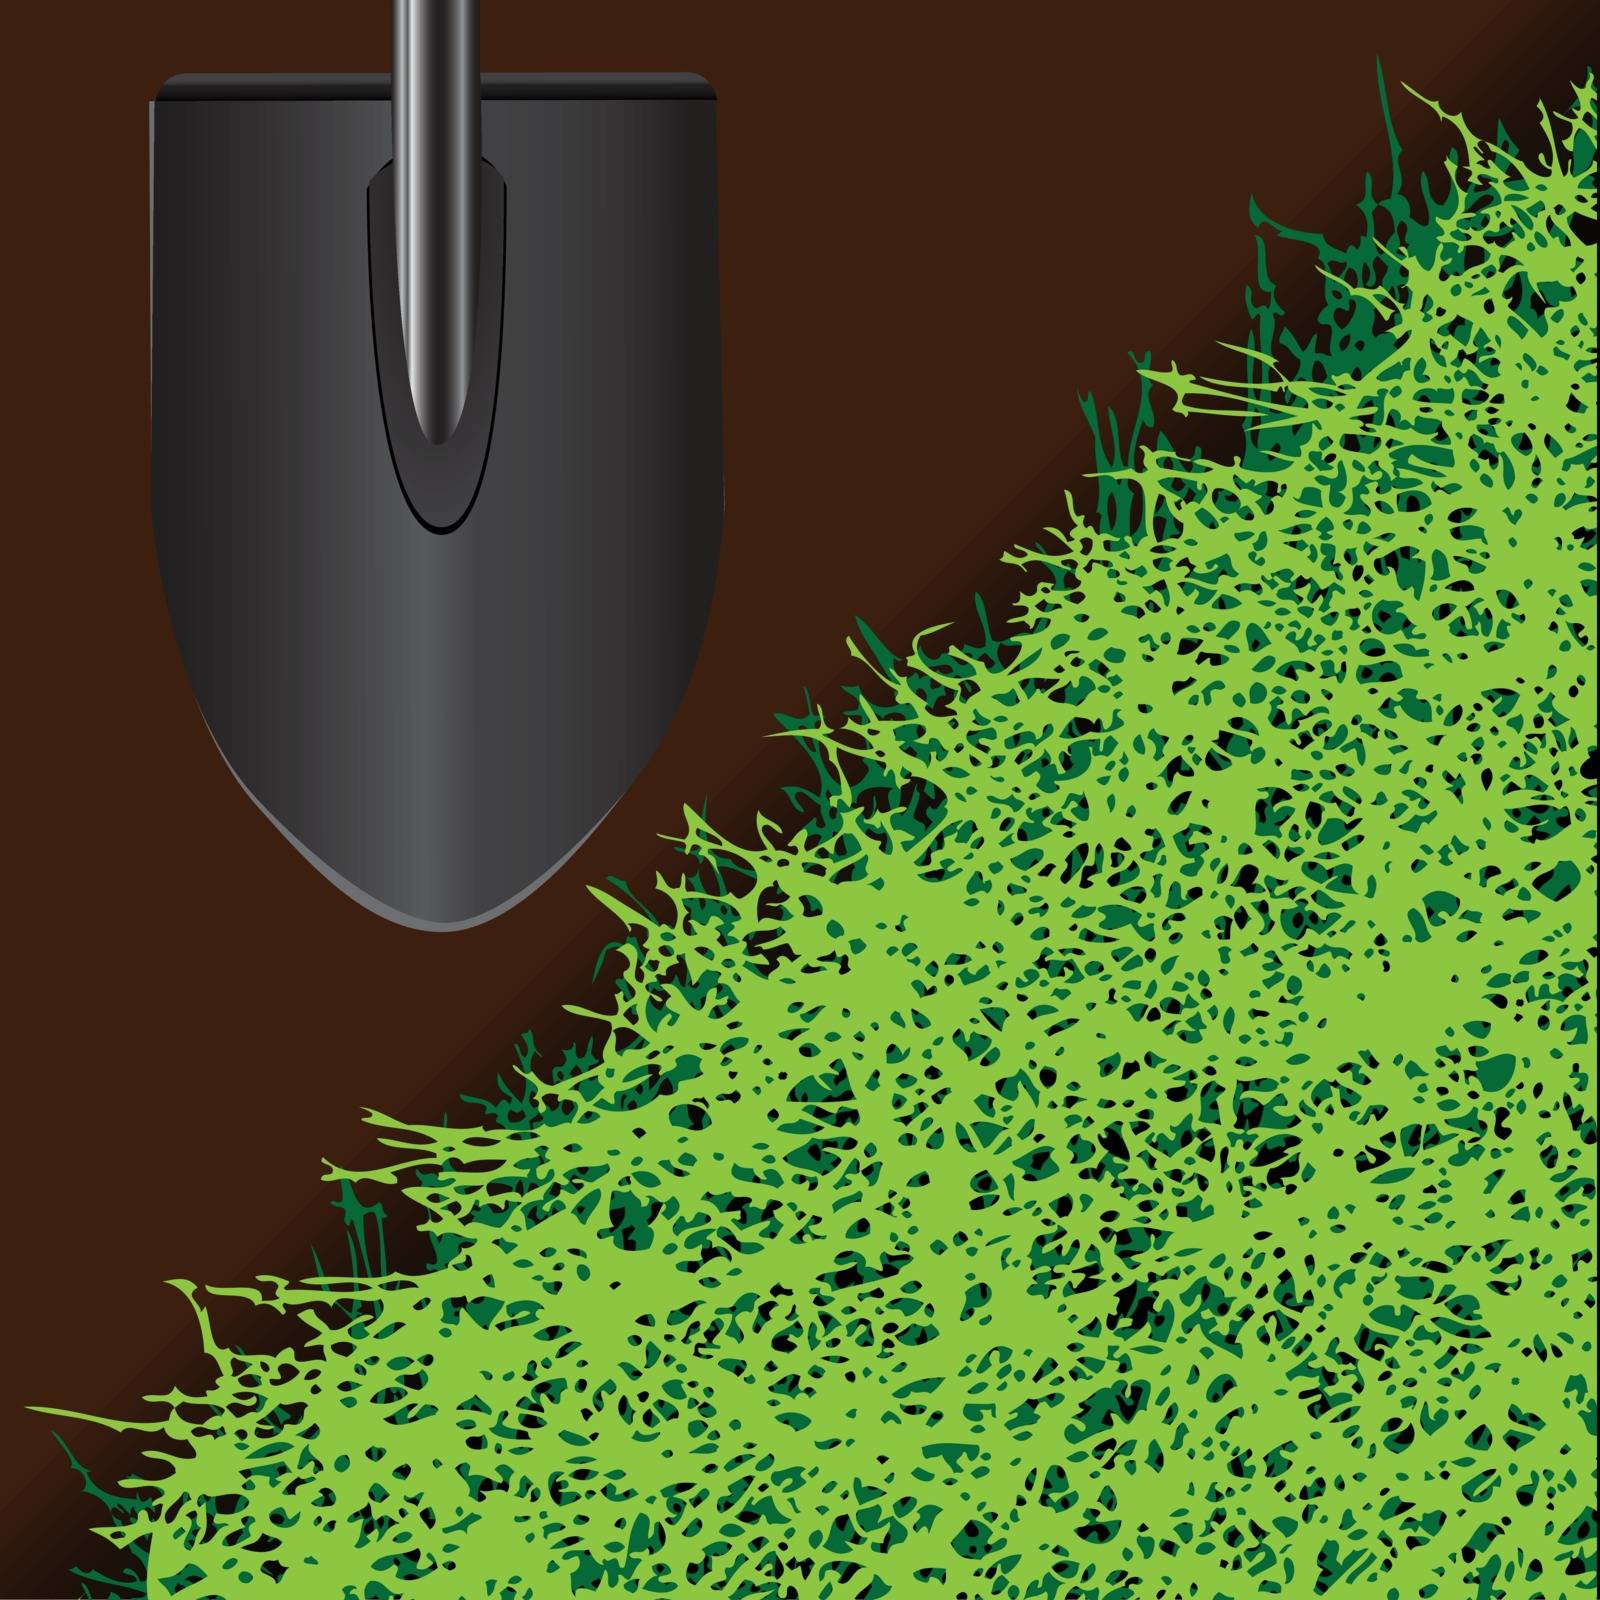 Shovel for farming on the ground with grass. Vector illustration.